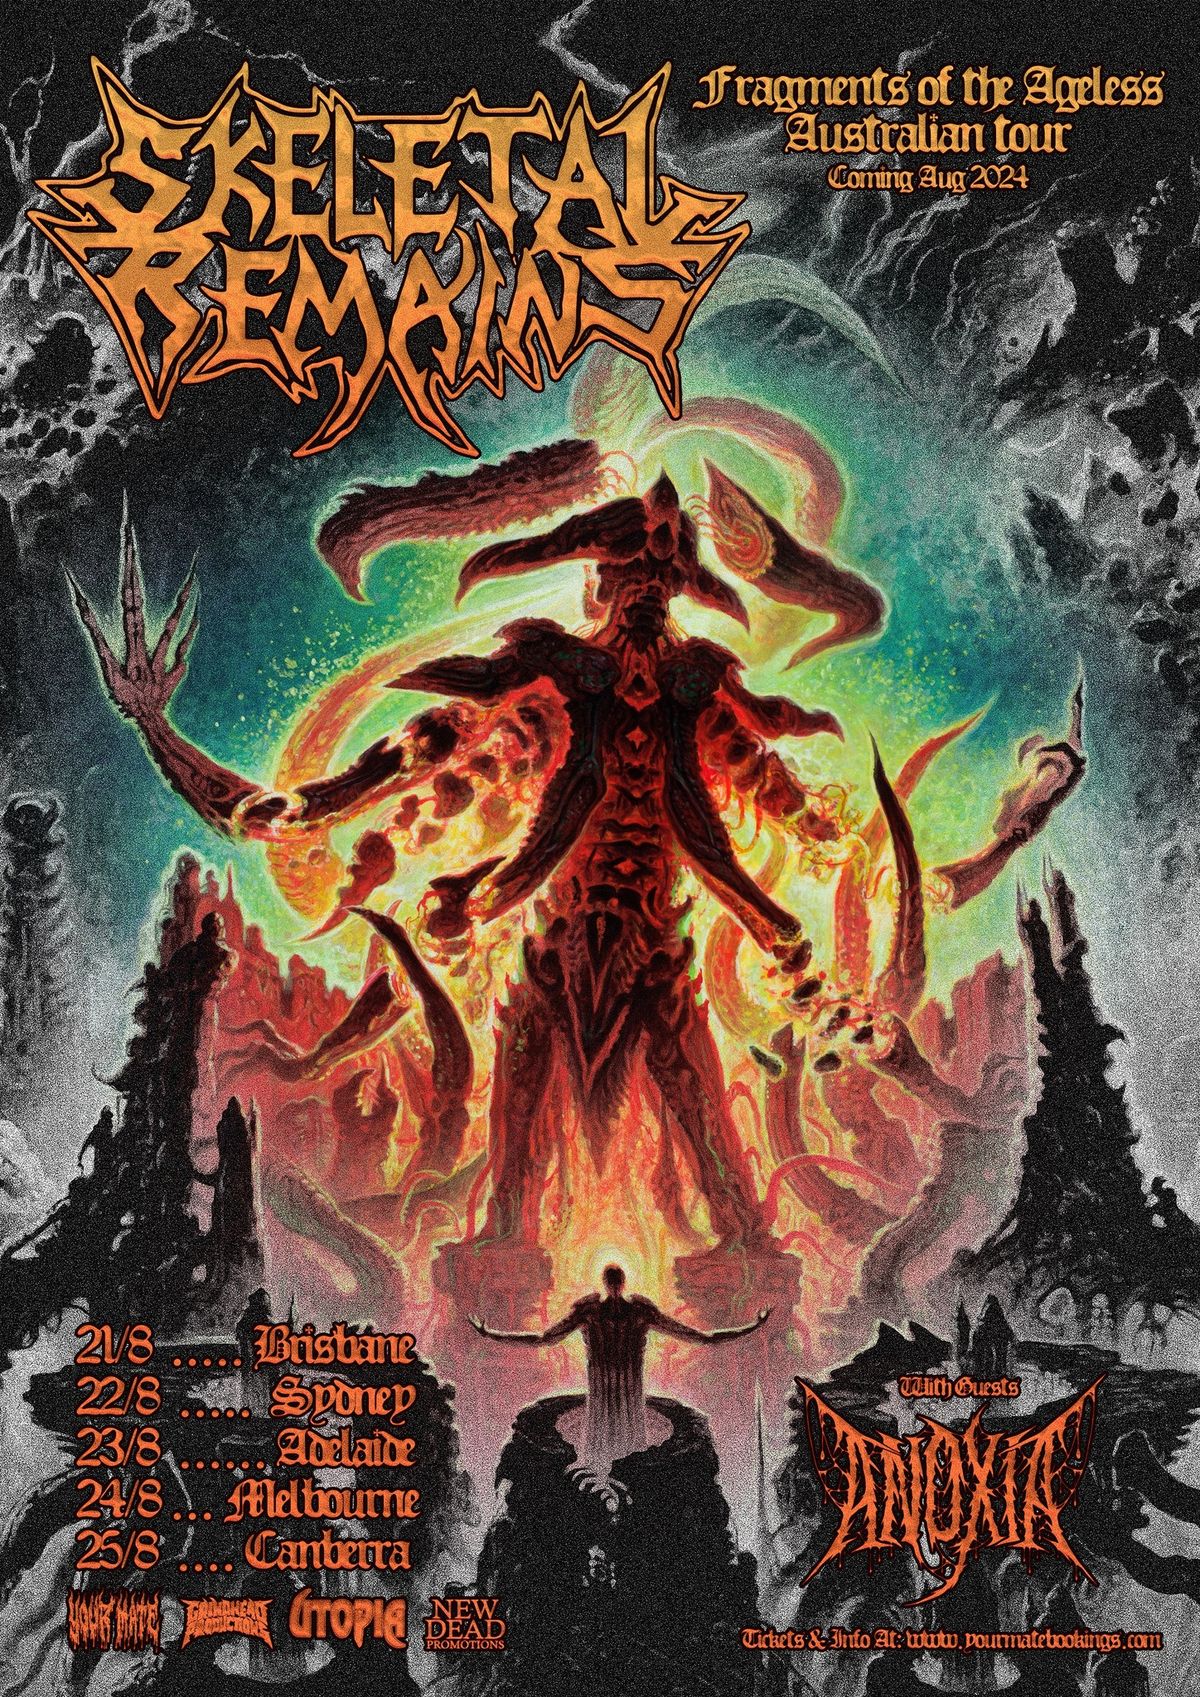 Skeletal Remains (USA) Melbourne with Anoxia & Guests